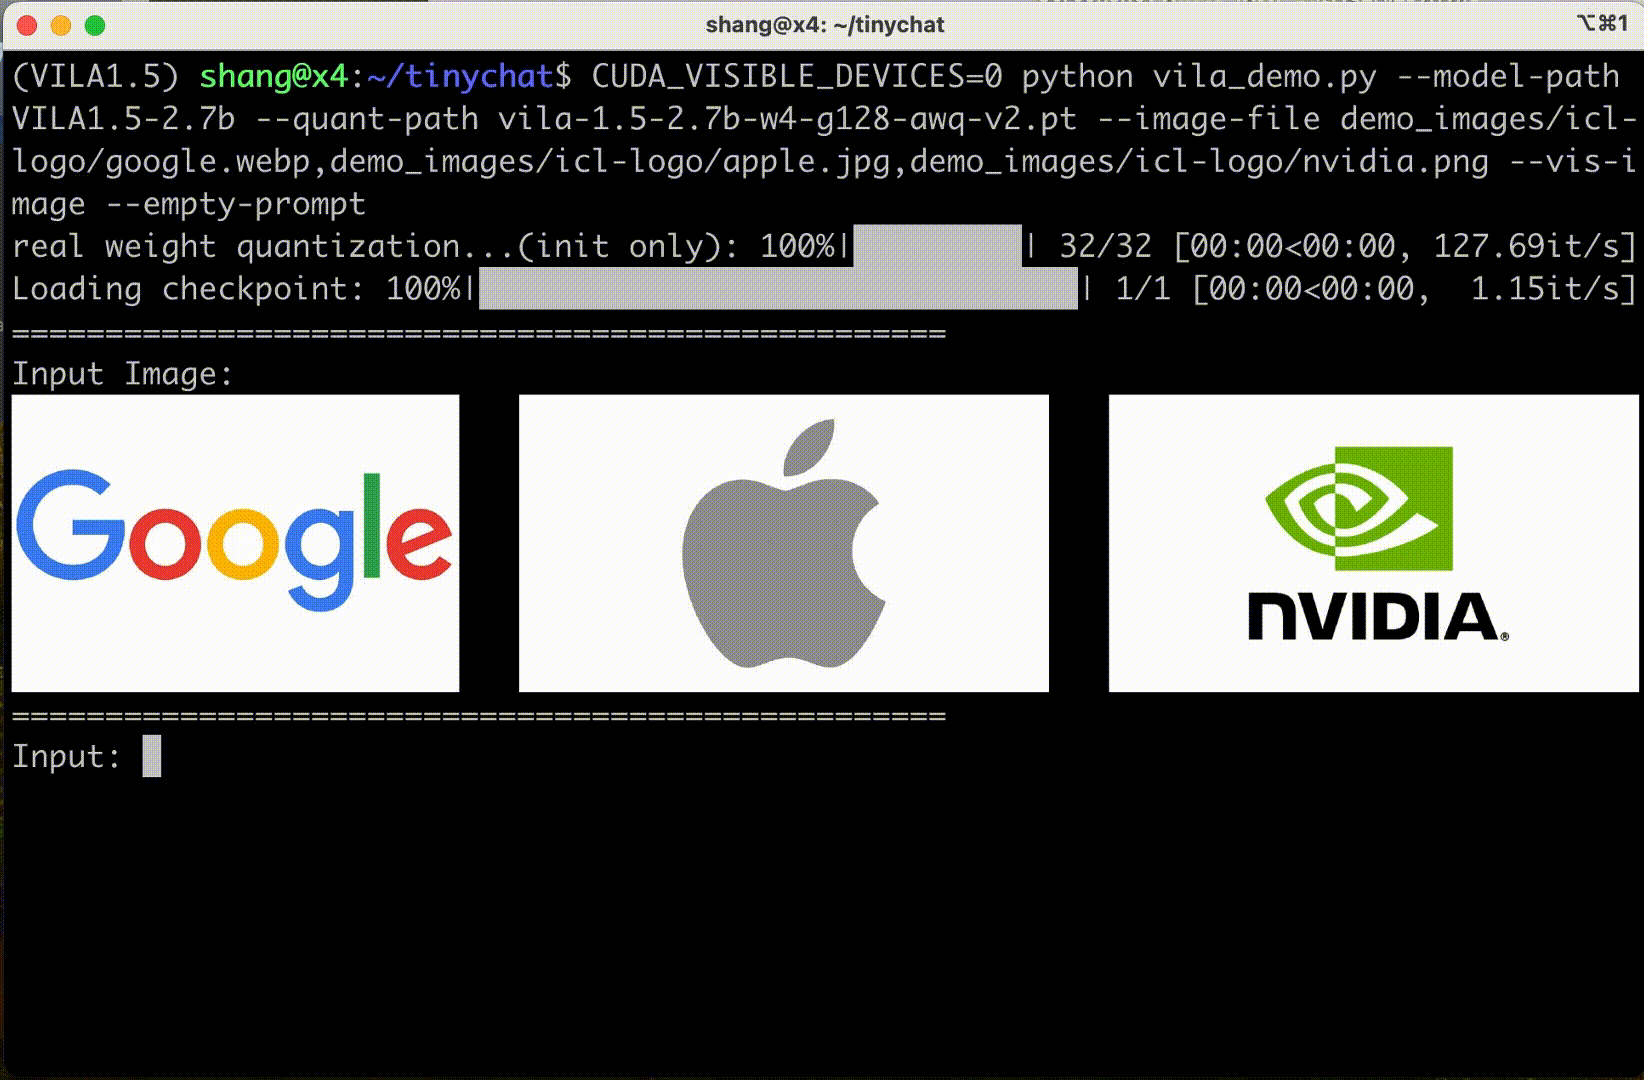 GIF shows that VILA figured out what NVIDIA is famous for, given the example of Google and Apple.